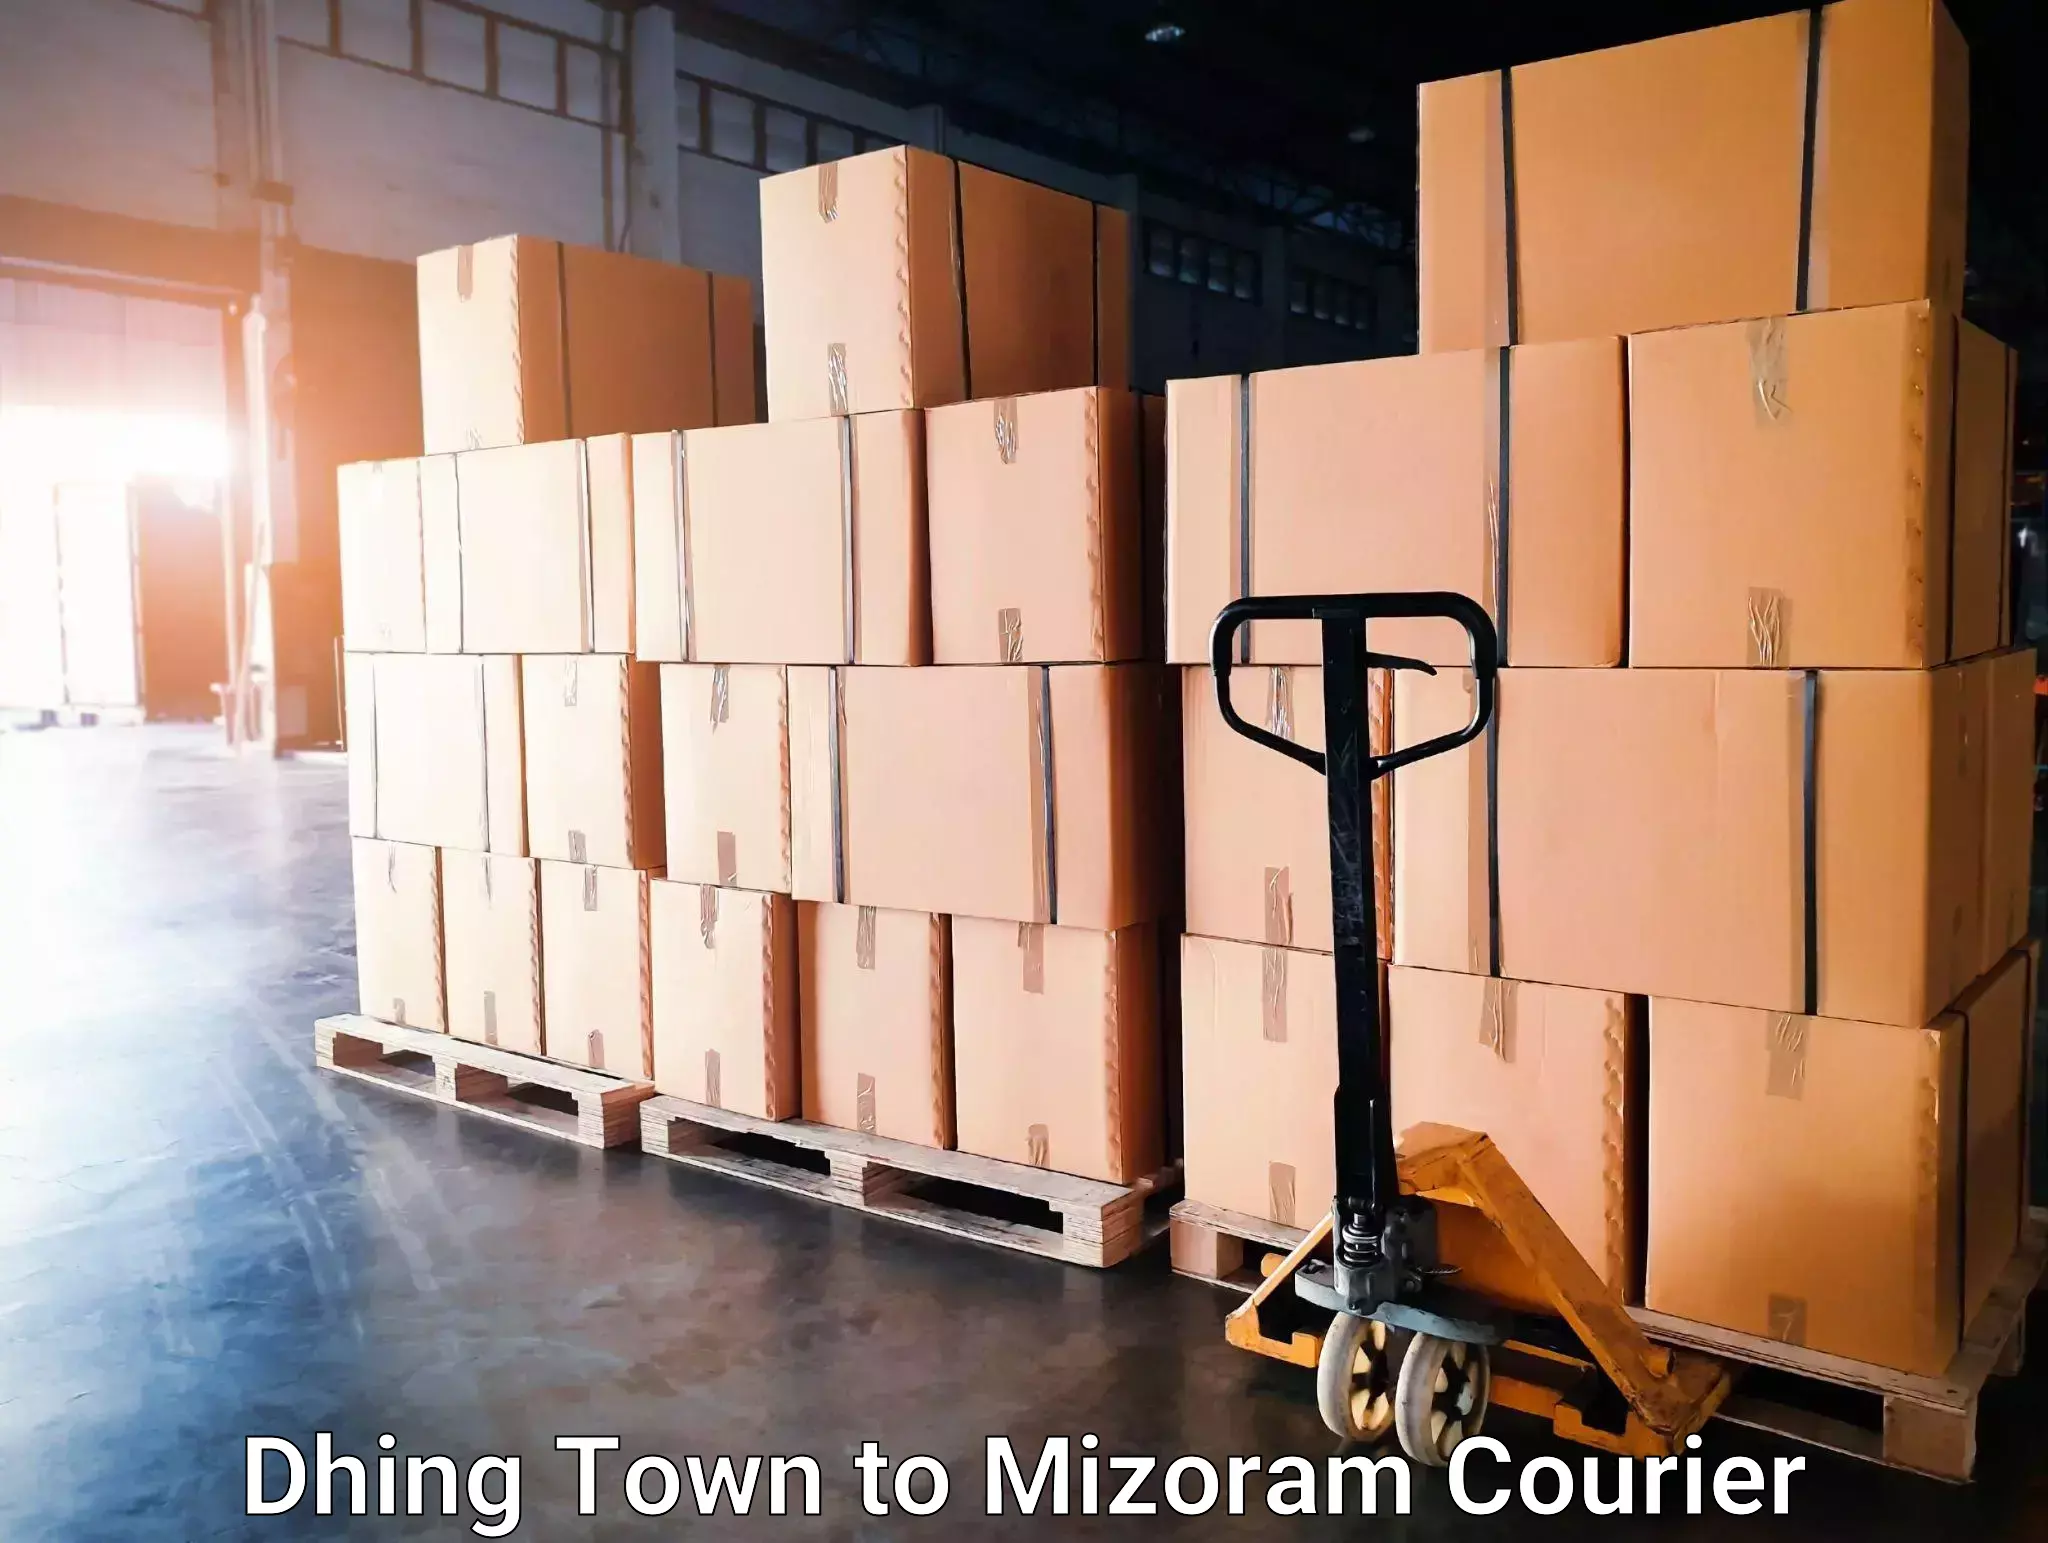 Global courier networks Dhing Town to Mizoram